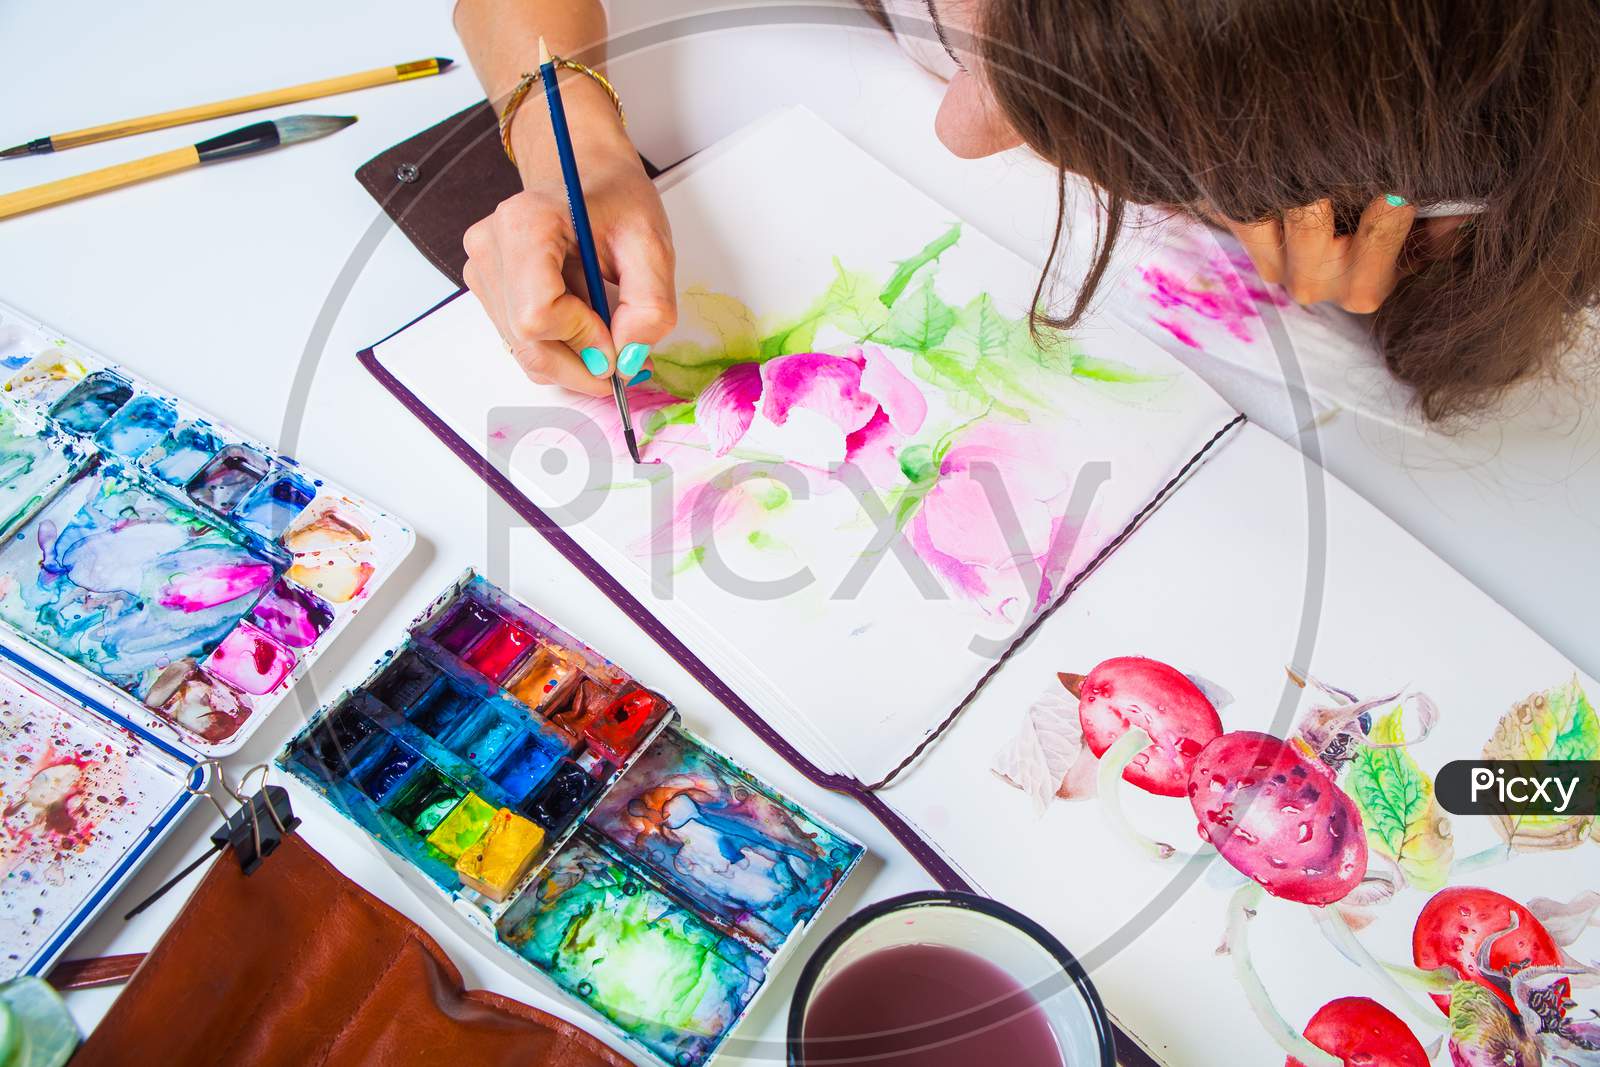 A Close-Up Artist Paints And Paints In The Album For Drawing A Thin Wooden Brush With Pink Watercolor Colors, On The Table Is A Leather Case With Brushes, Watercolor Palette,  Brushes, Cup Of Water